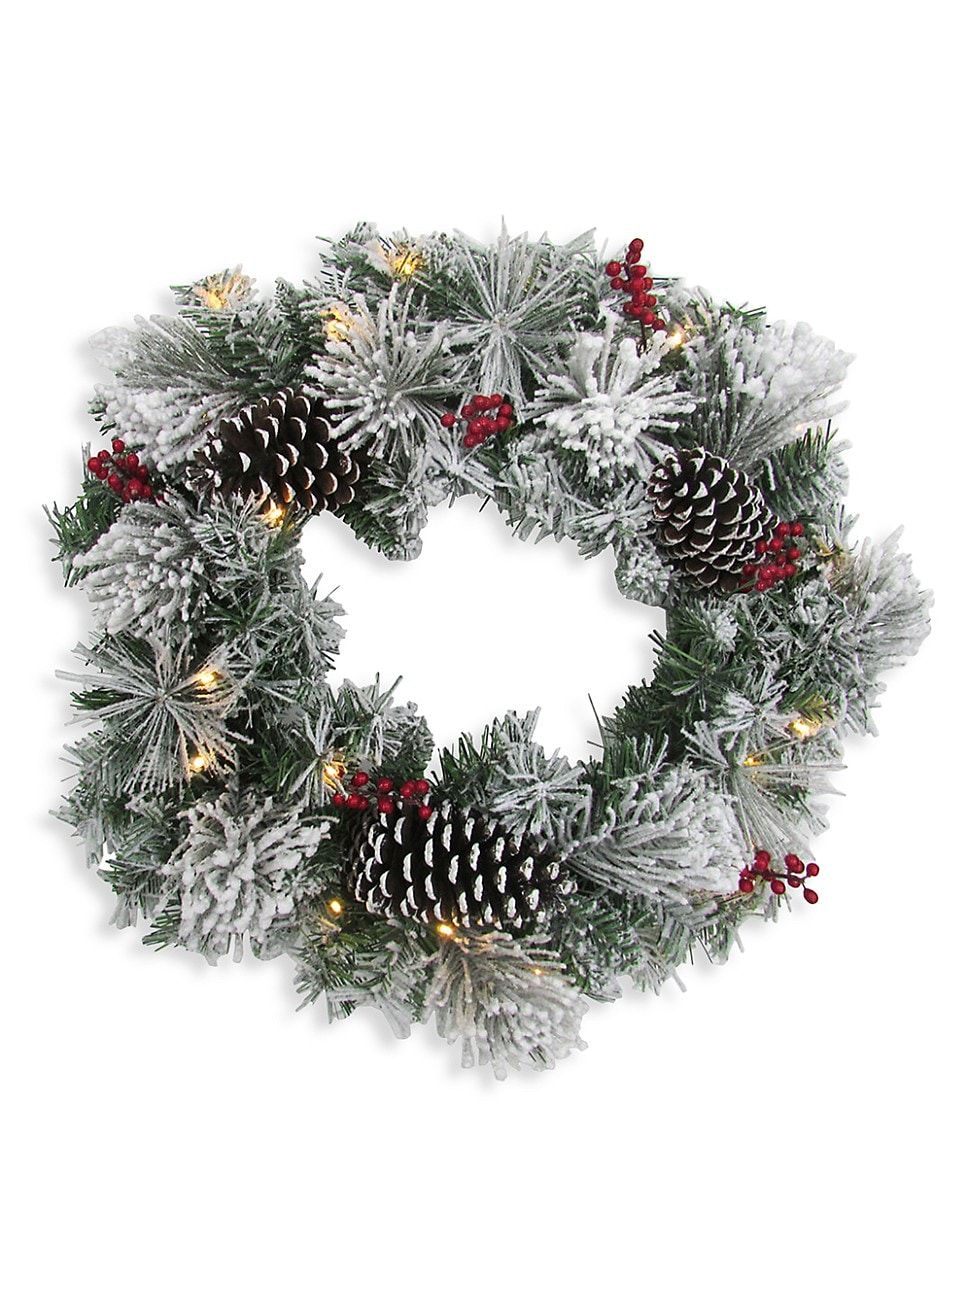 24-Inch Christmas Prelit Snow Covered Wreath with Pinecones &Berries | Saks Fifth Avenue